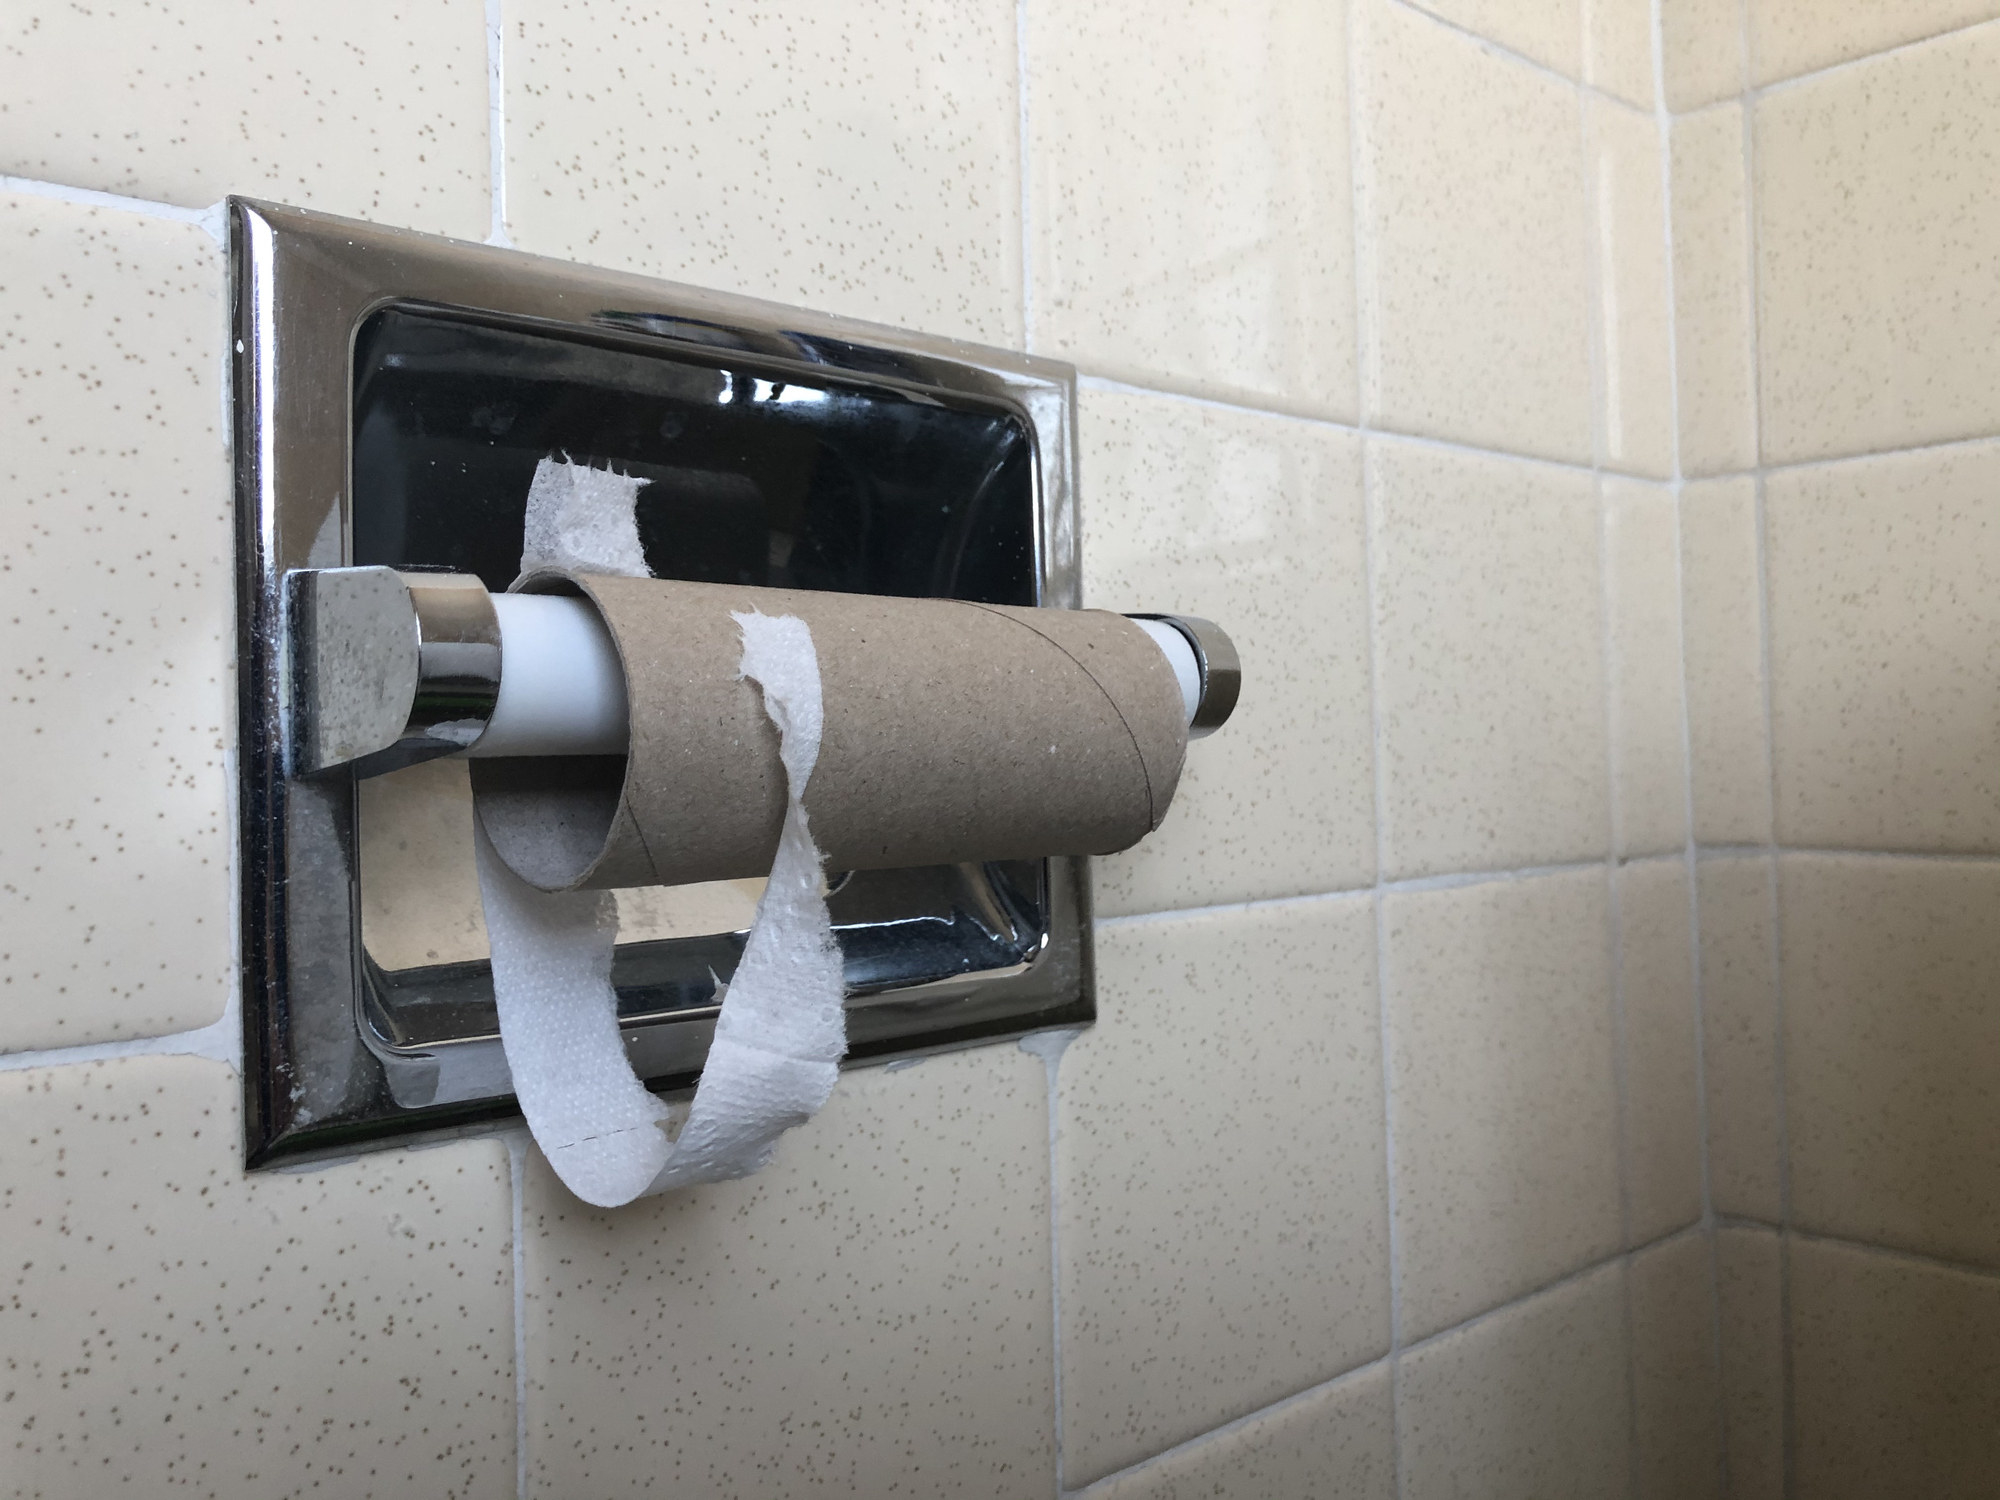 An empty toilet roll in a bathroom stall.